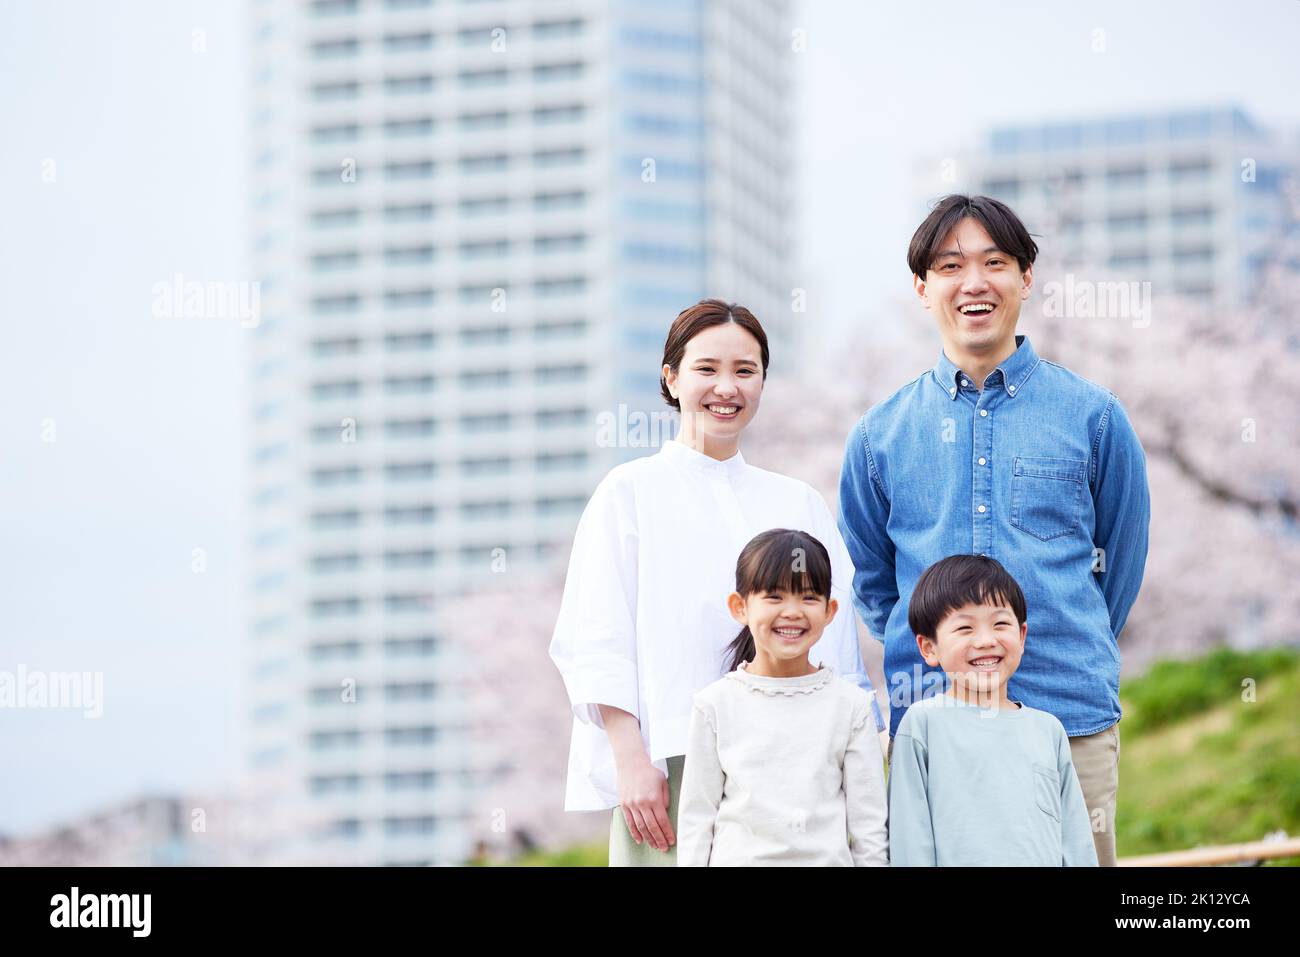 Japanese family with blooming cherry blossoms Stock Photo